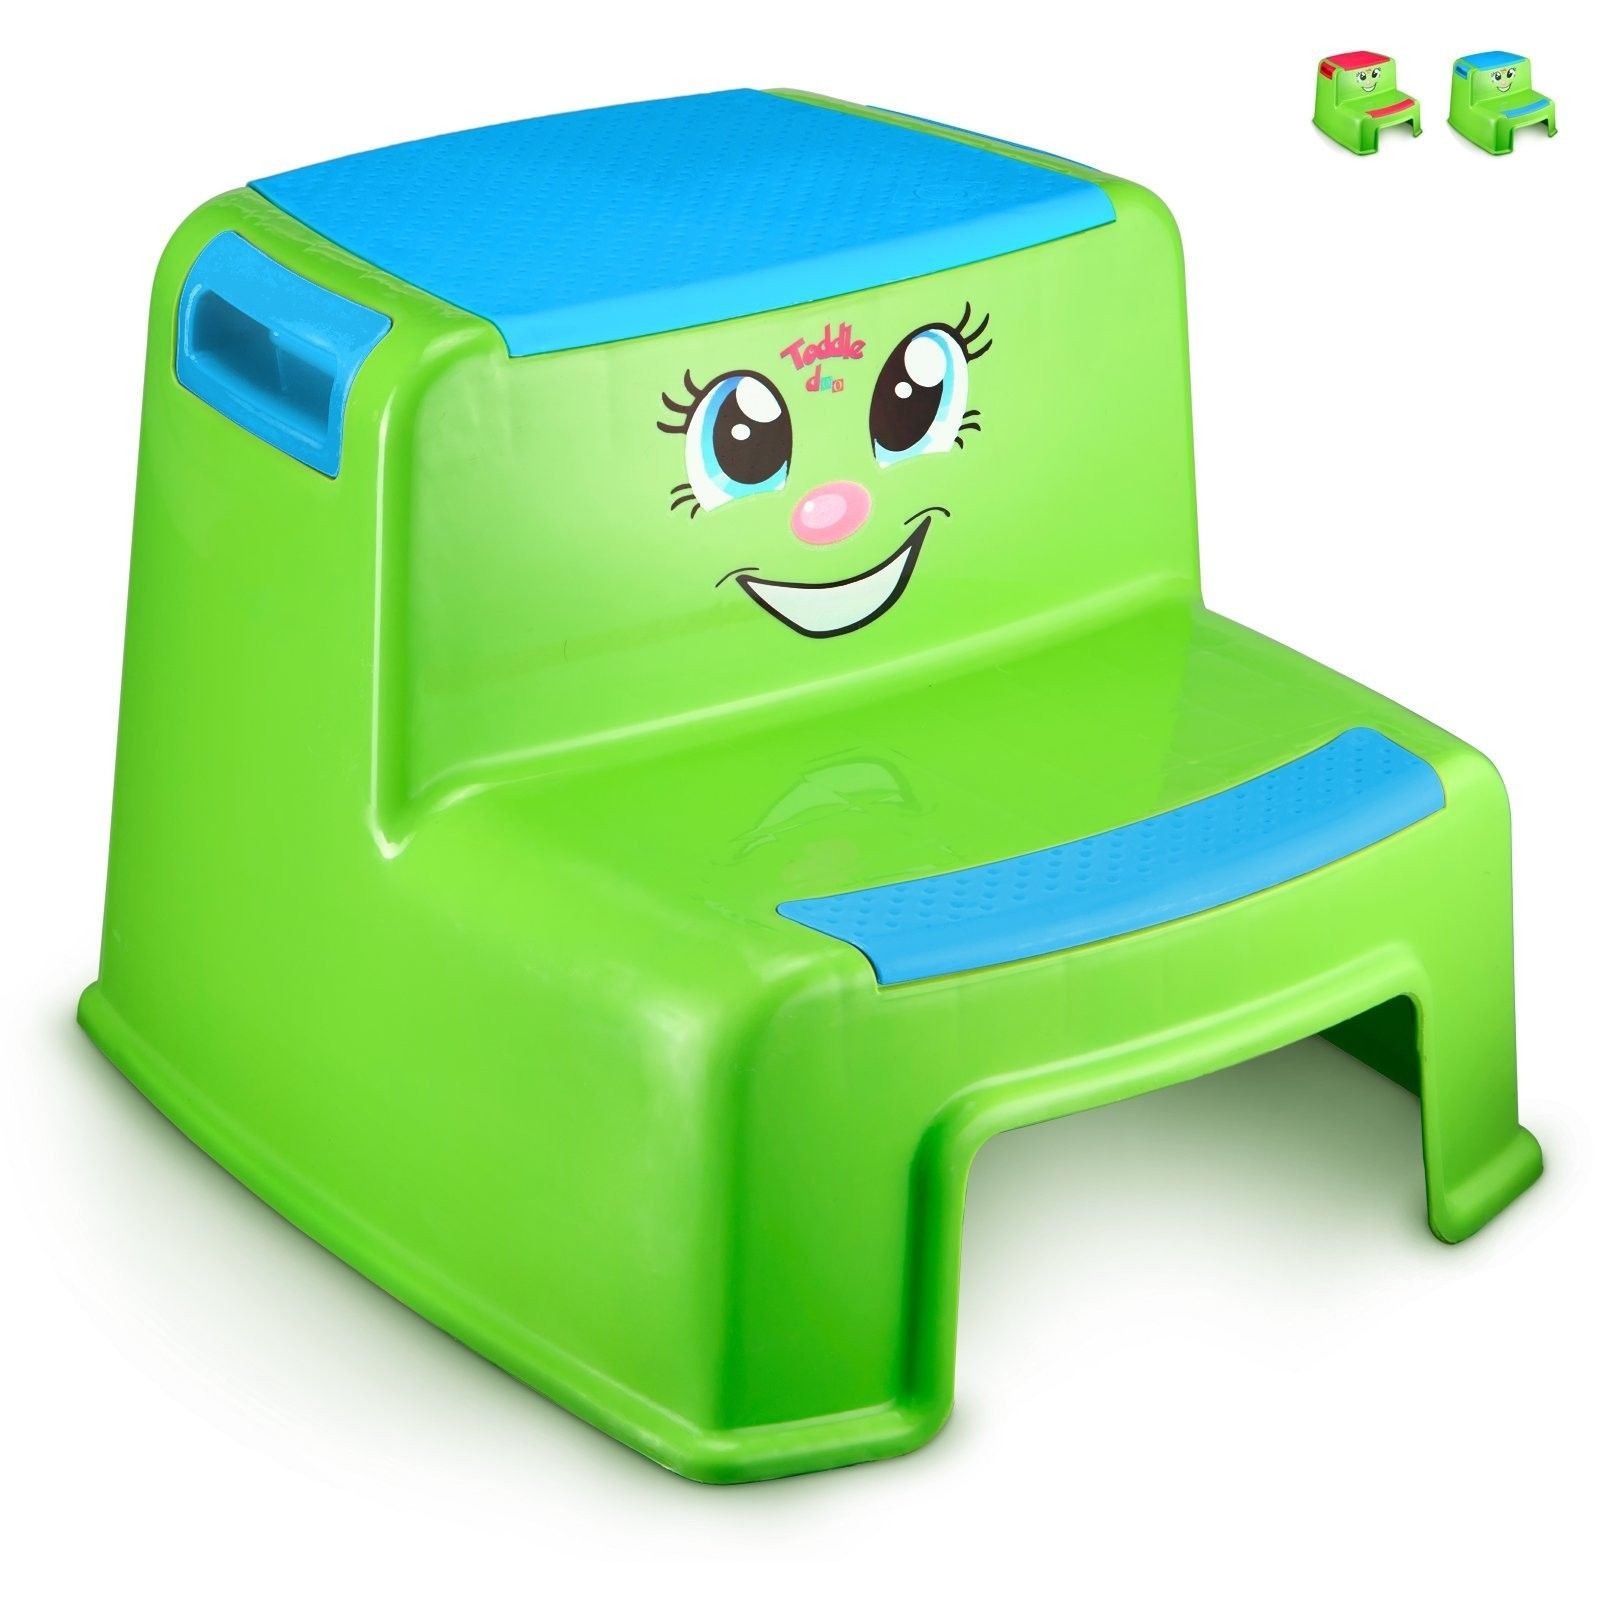 Kids Bathroom Stool
 Step Stools for Kids – Toddlers Potty Step Stool for